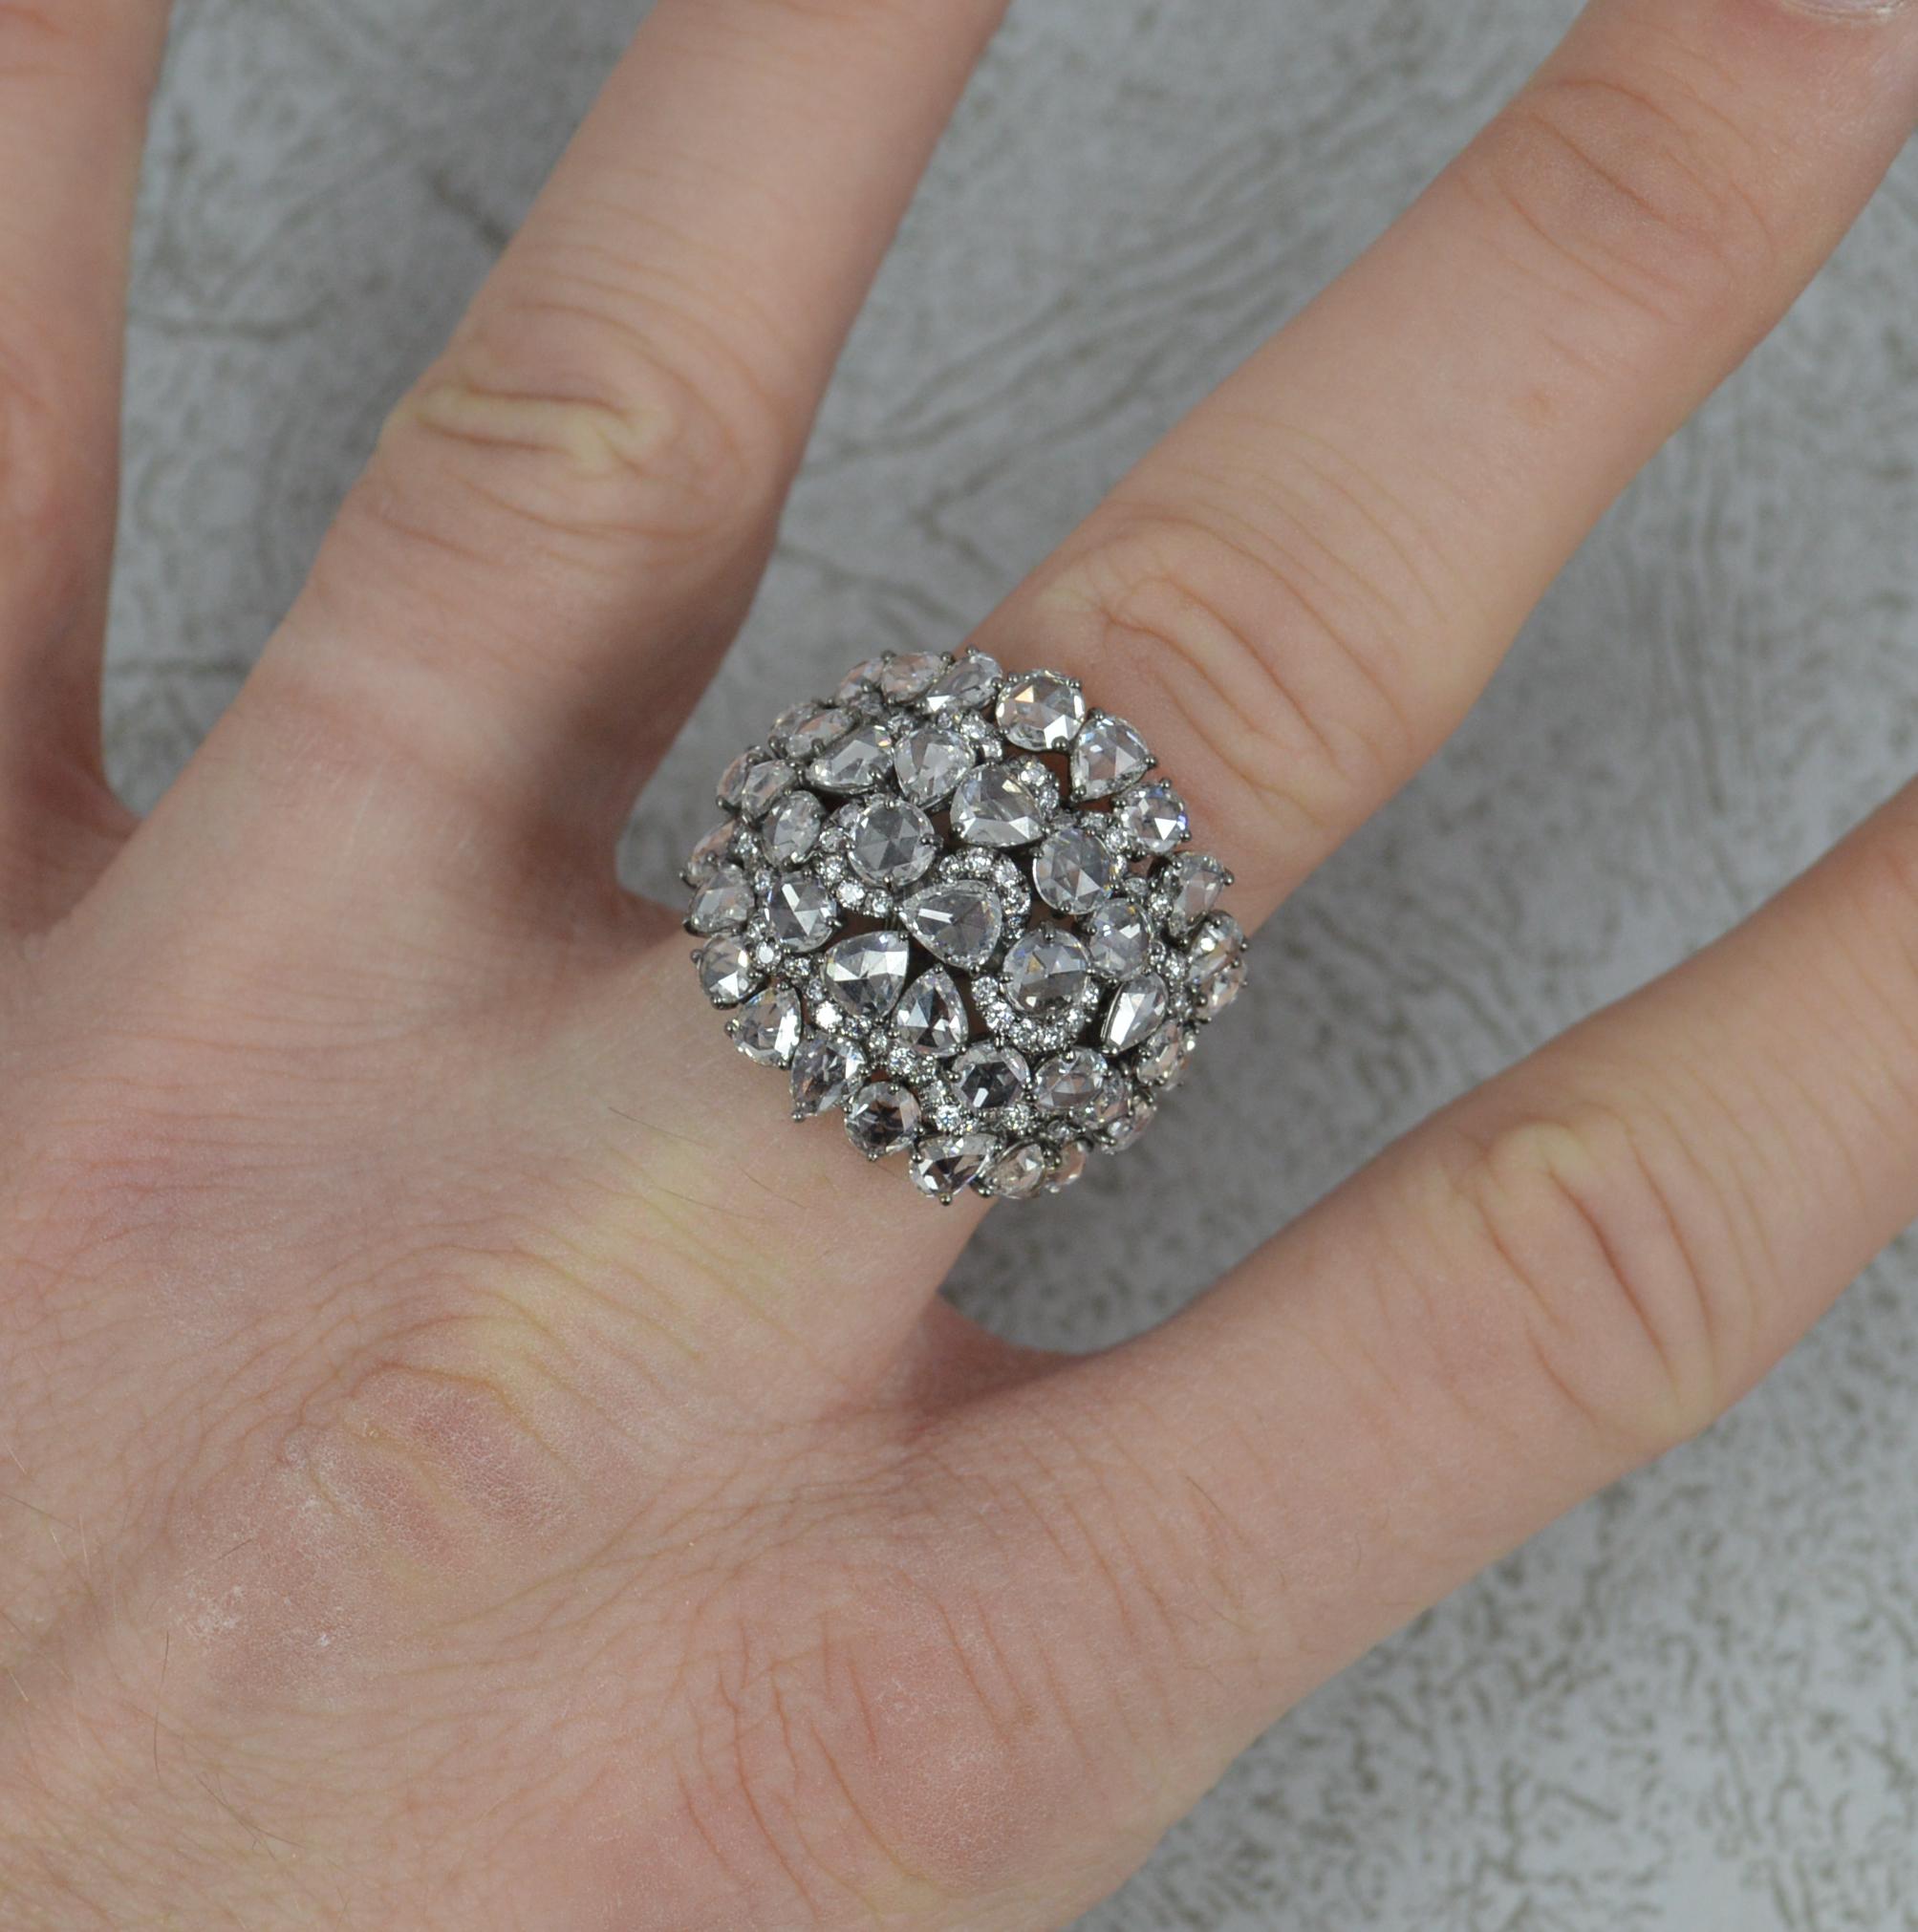 One breathtaking diamond ring. A true cocktail cluster ring.
The cluster head comprised of many natural rose cut diamonds of round and pear shape with smaller round brilliant cut diamonds in between. Total carat weight of 5.46 carats as confirmed to